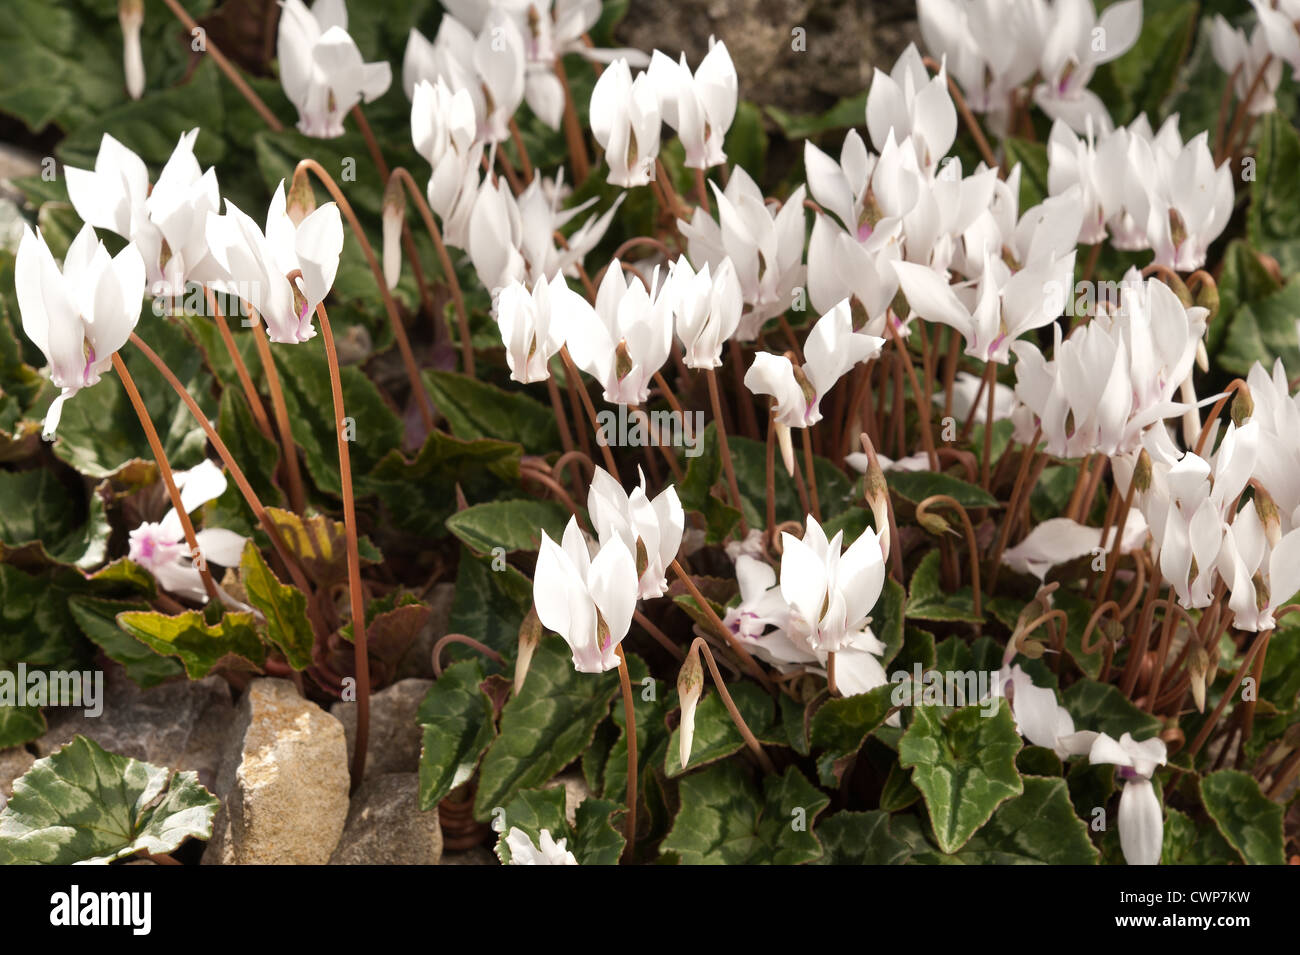 Cyclamen hederifolium album mass of white bloom flower heads with variably patterned leaves Stock Photo